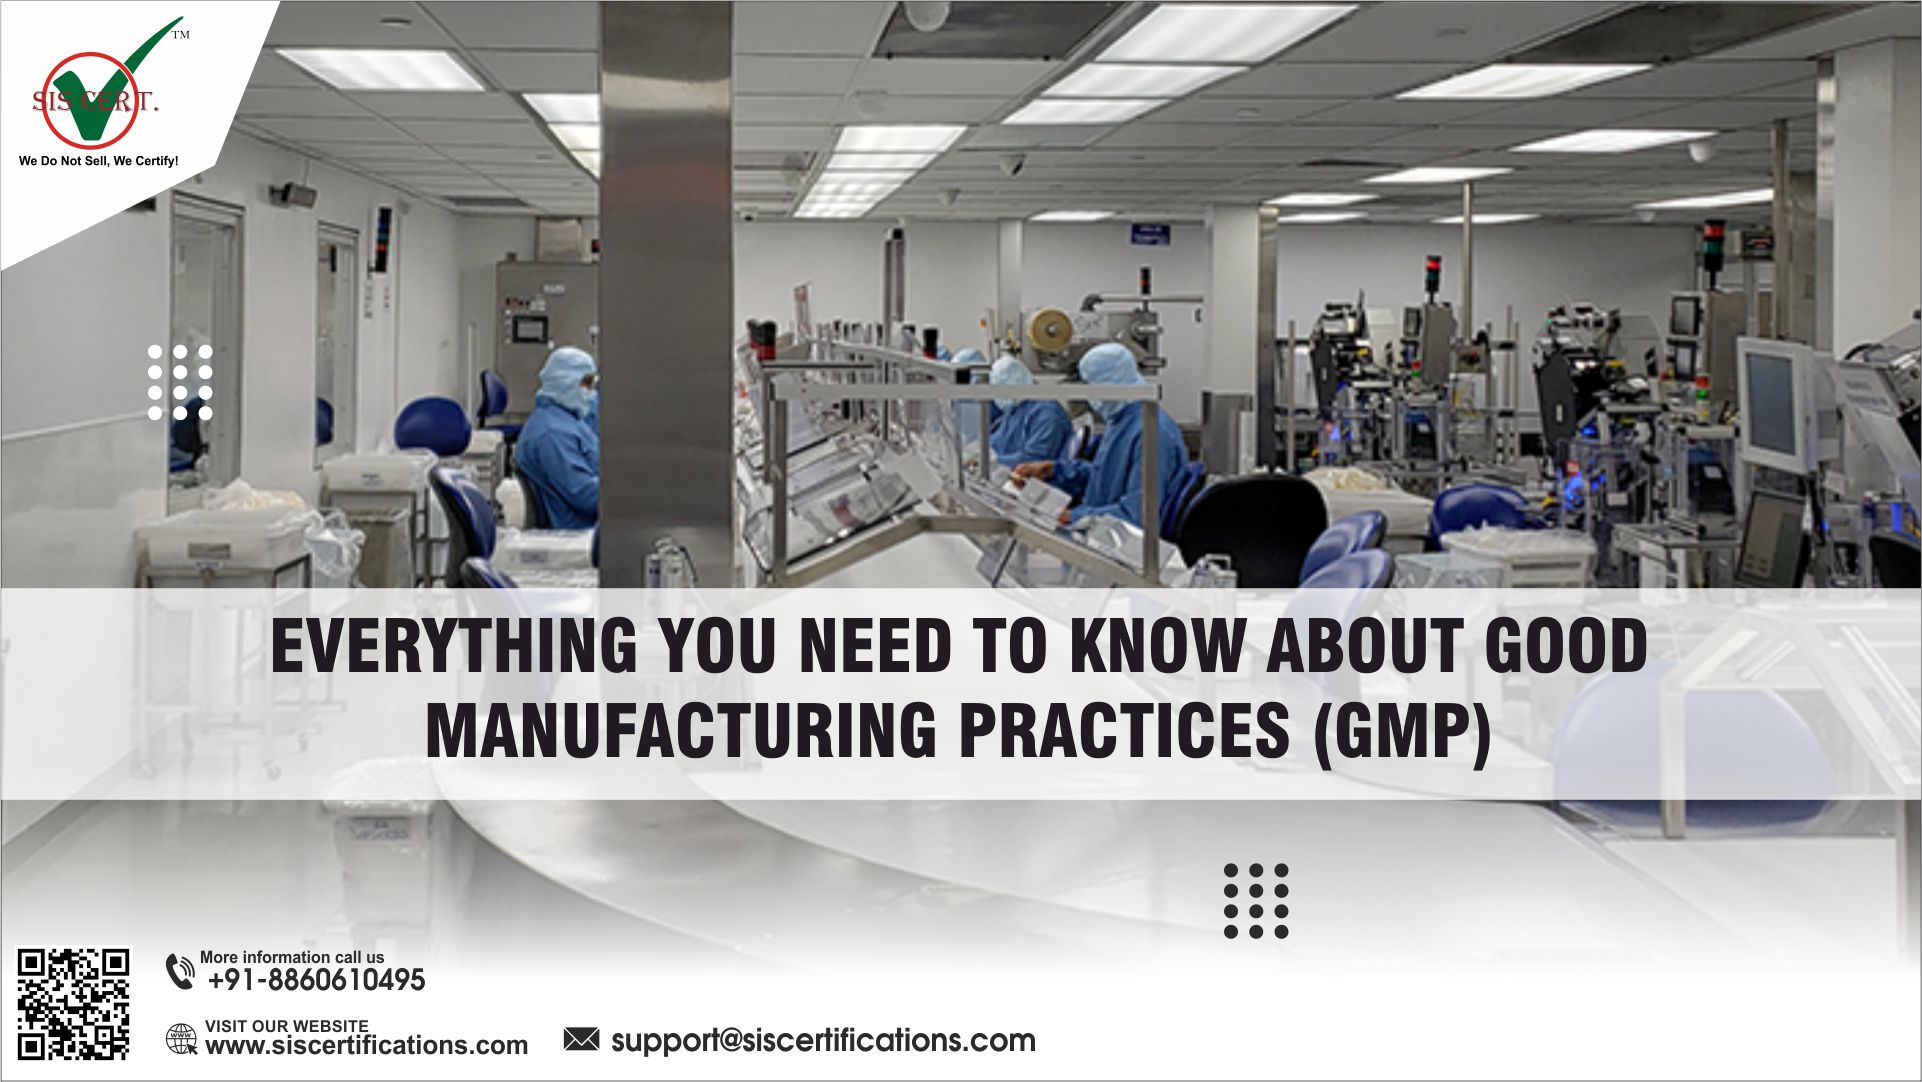 Everything You Need to Know About Good Manufacturing Practices (GMP)